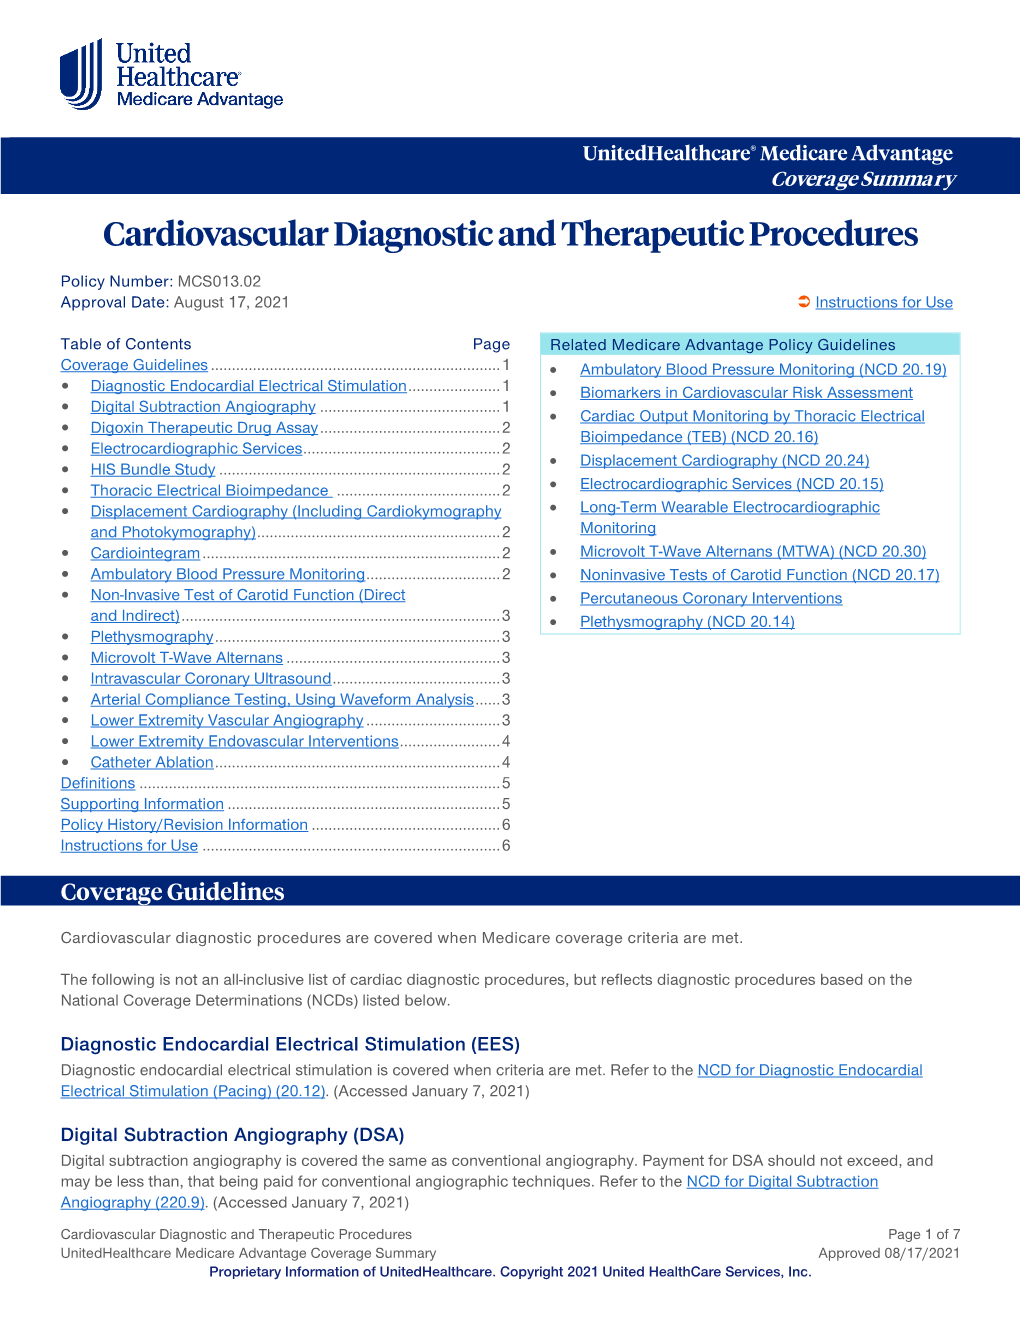 Cardiovascular Diagnostic Procedures Are Covered When Medicare Coverage Criteria Are Met